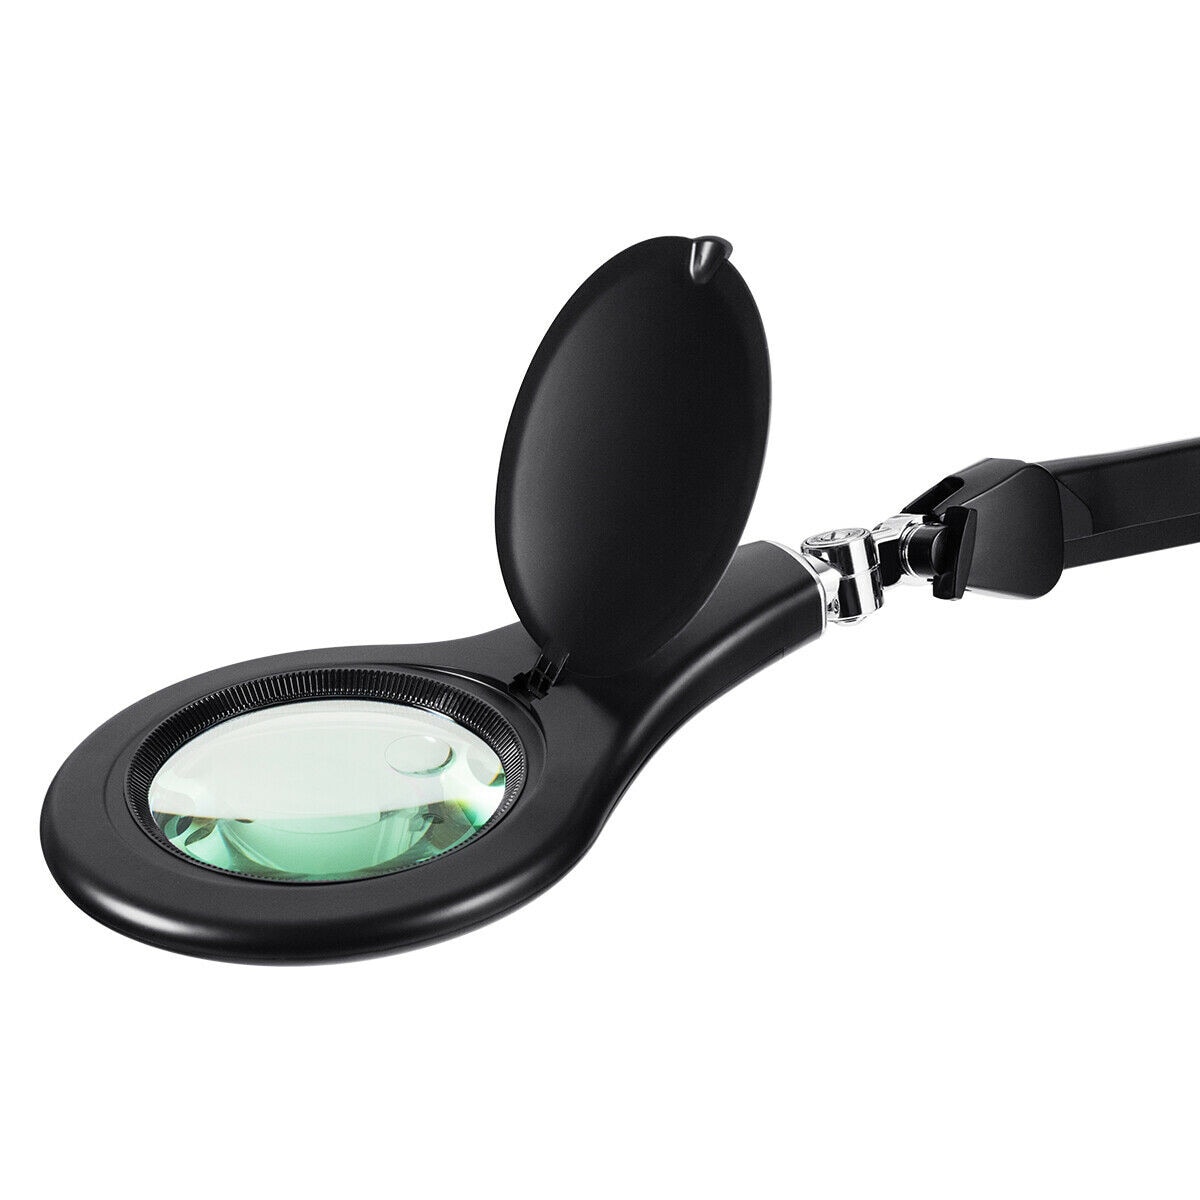 LED Magnifying Magnifier Glass with Light on Stand Clamp Arm Hands Free  Black 